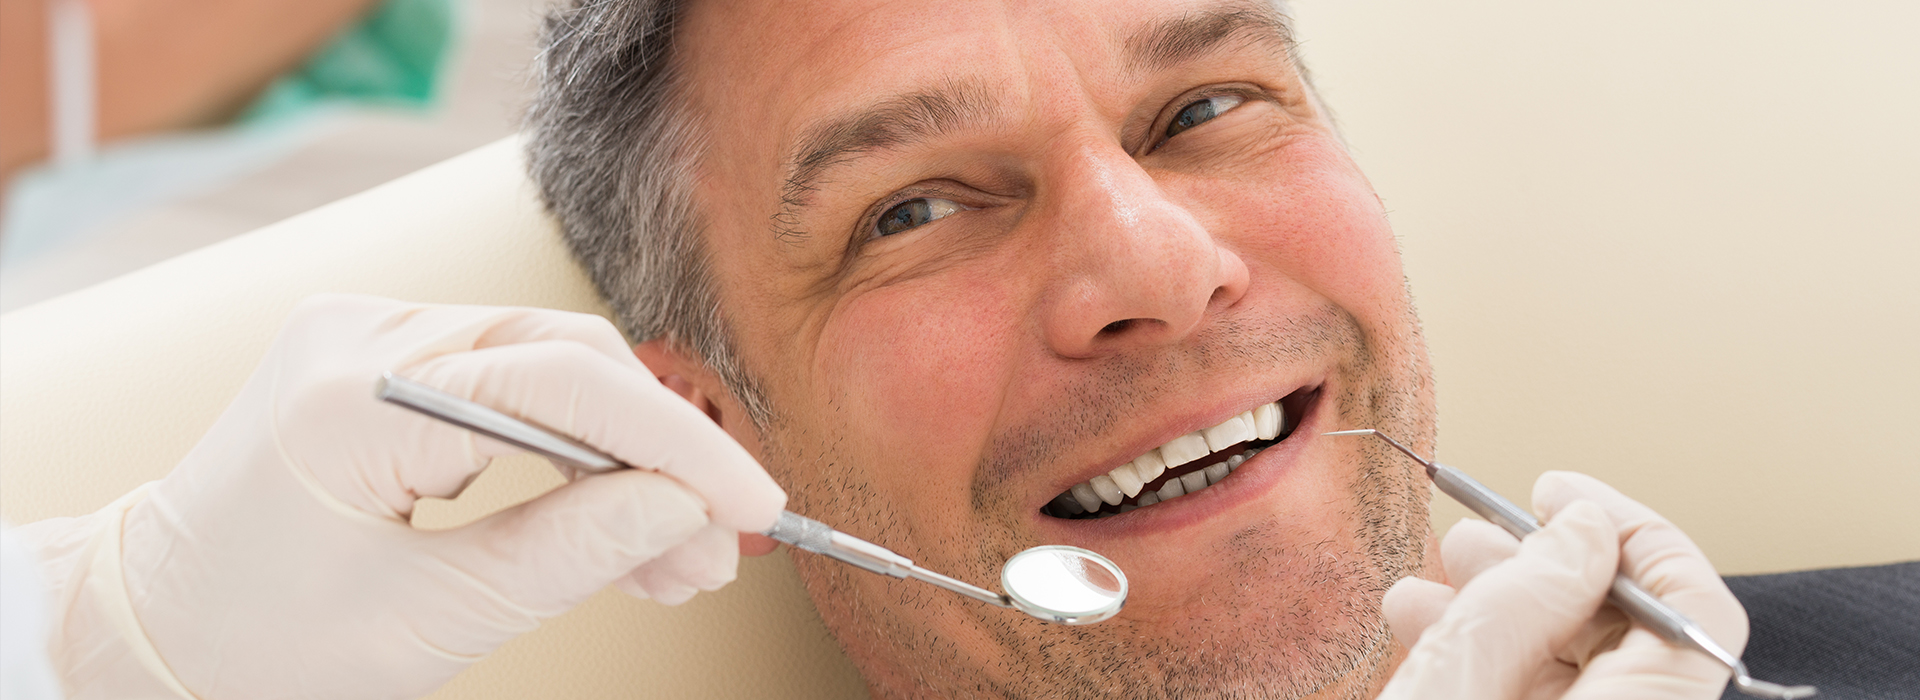 Lodi Family Dentistry | Oral Cancer Screening, TMJ Disorders and Implant Dentistry